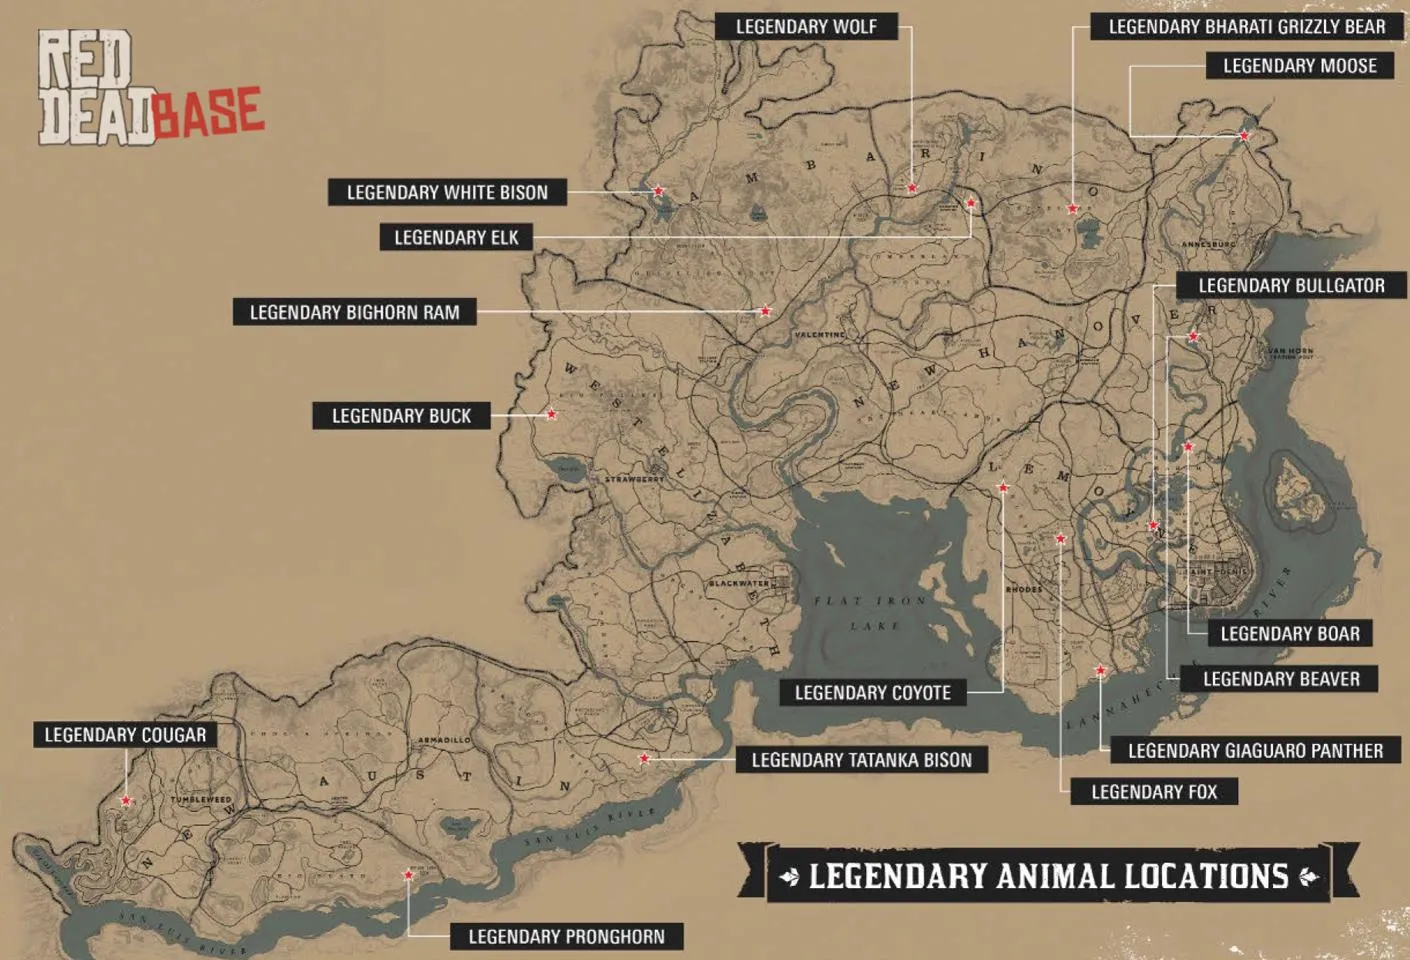 Legendary Cougar - Map Location in RDR2